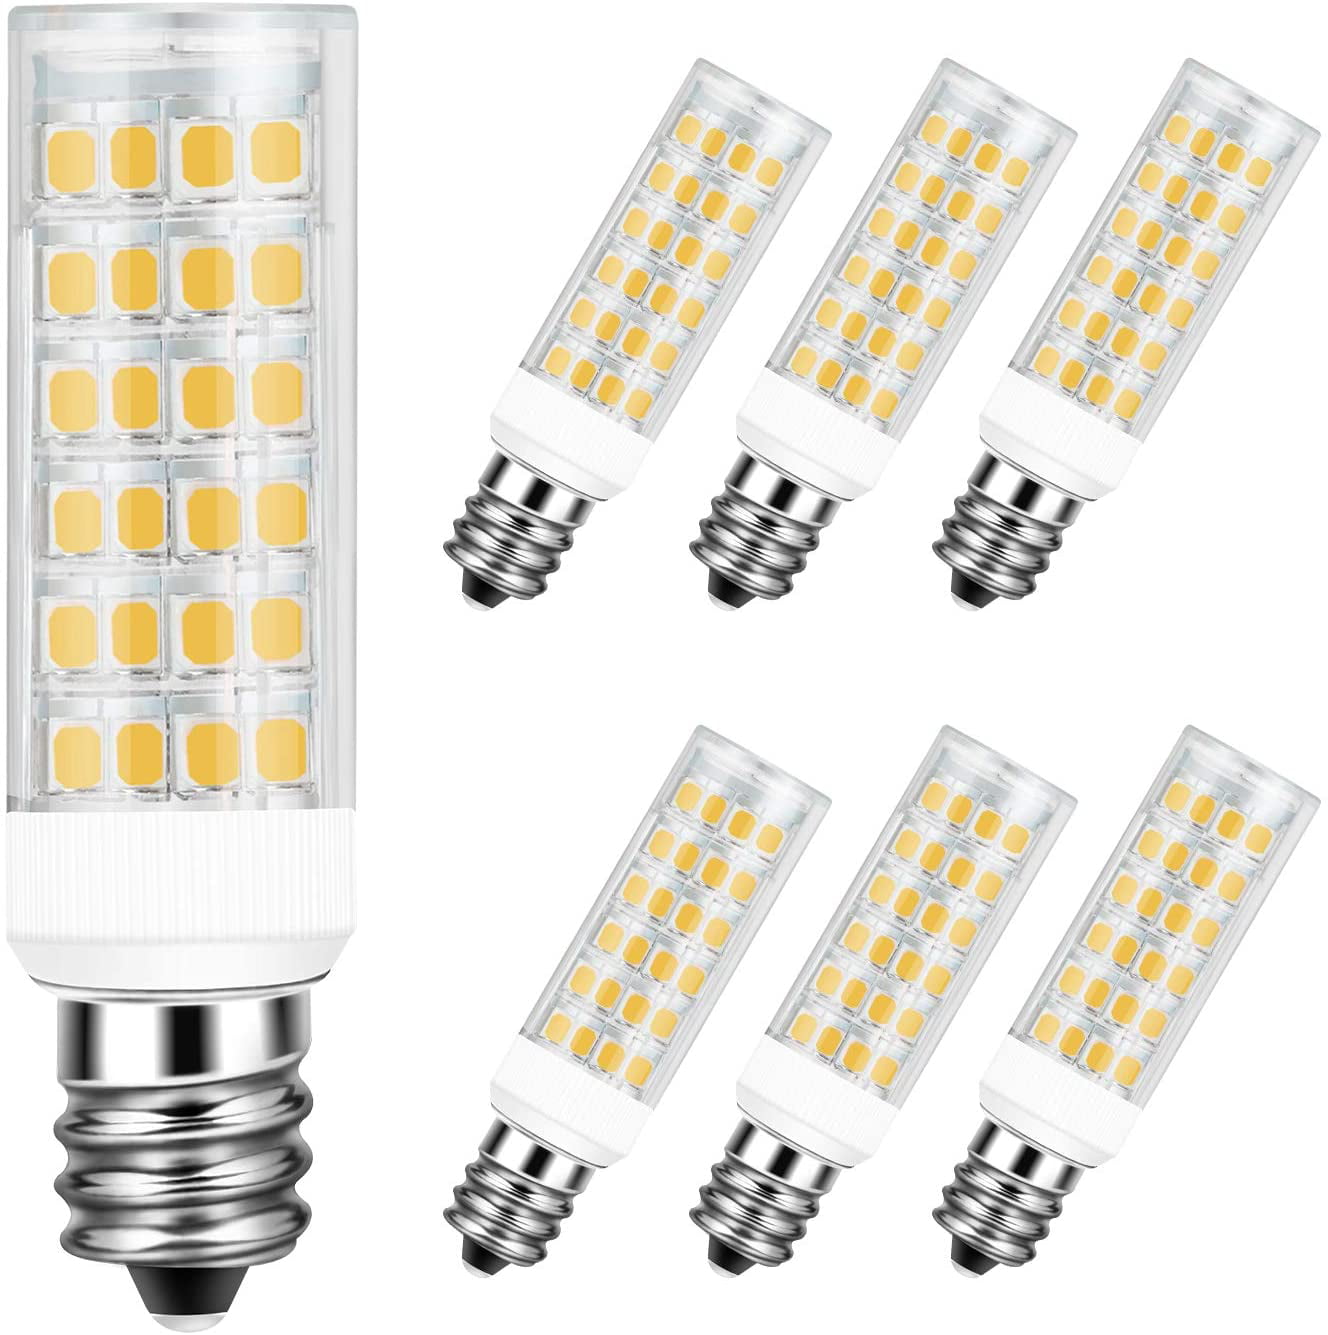 Chandelier E12 LED Candelabra Bulb 5W,Warm White,Dimmable,110V,T3/T4 led Halogen Bulb Replacement 50W for Ceiling Fan 5-Pack YYL Indoor Decorative Lighting 